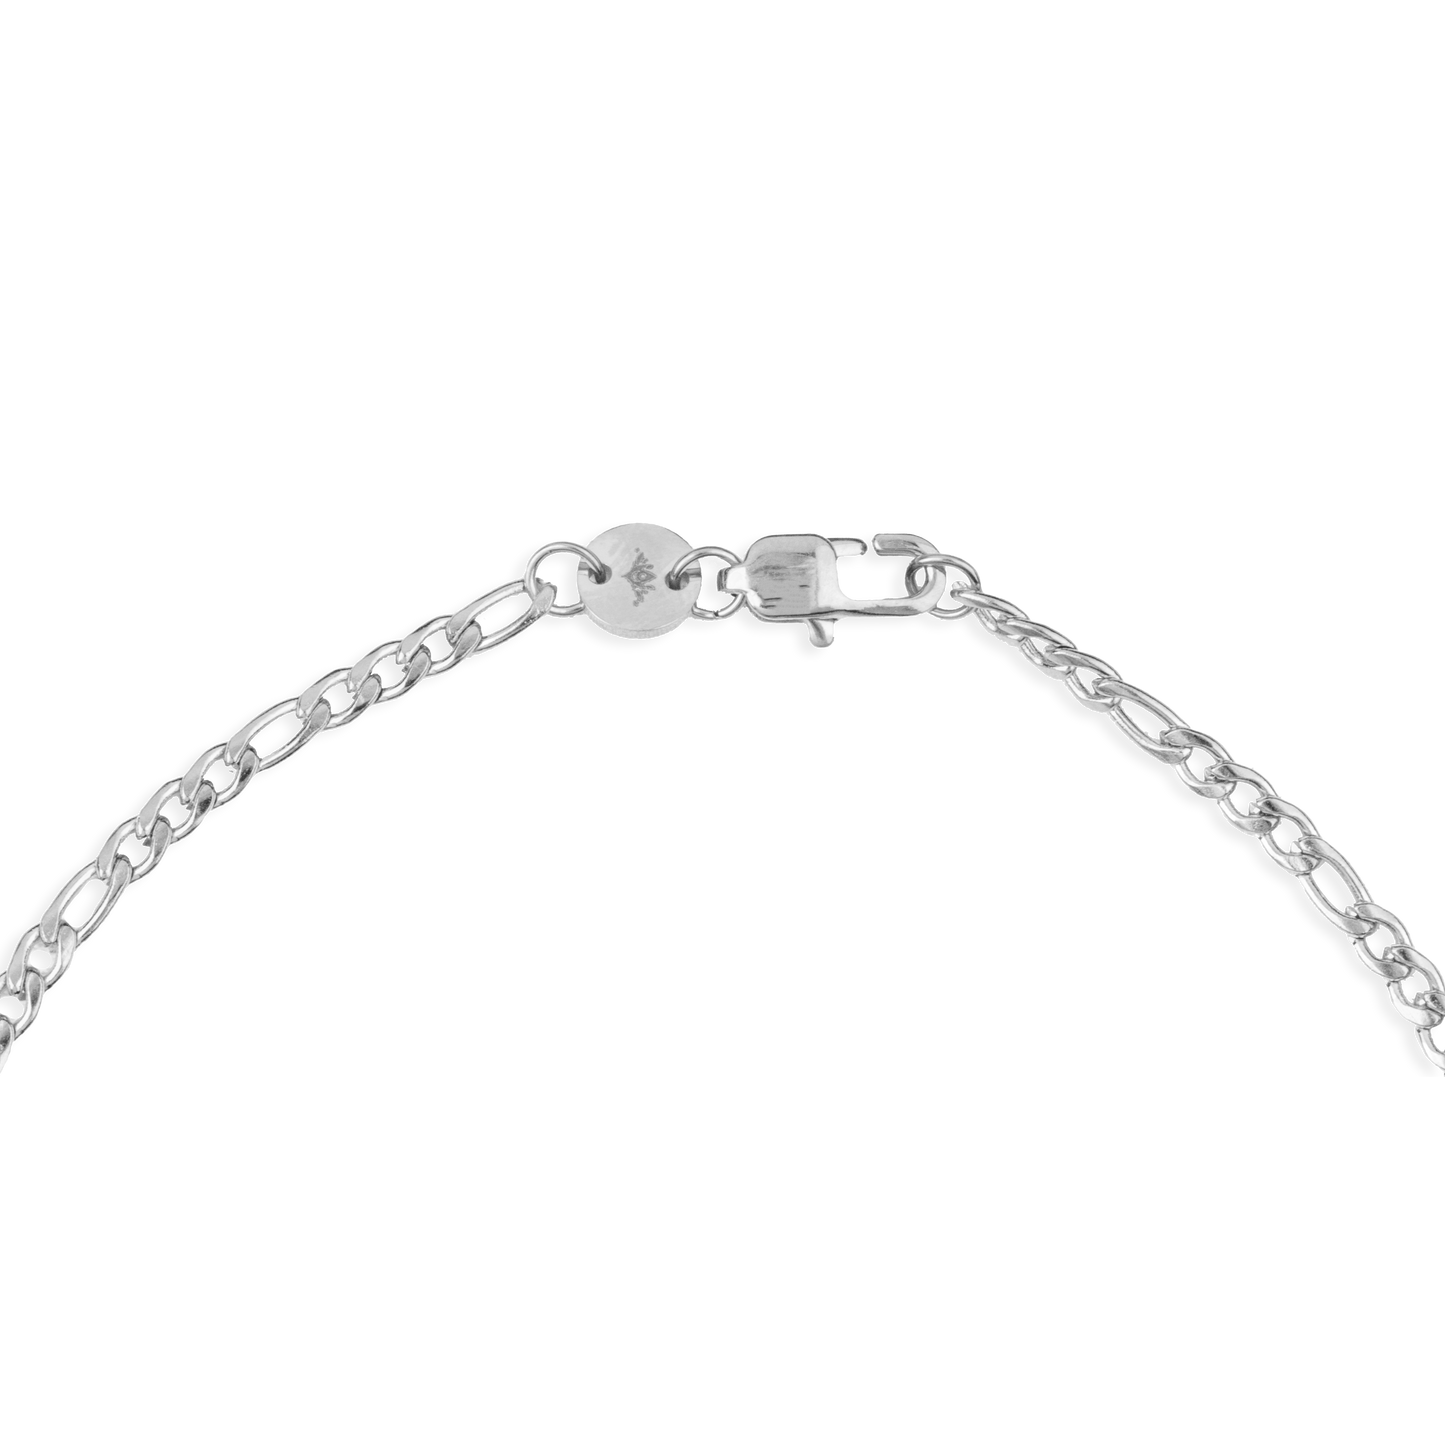 Figaro Necklace Silber 40cm